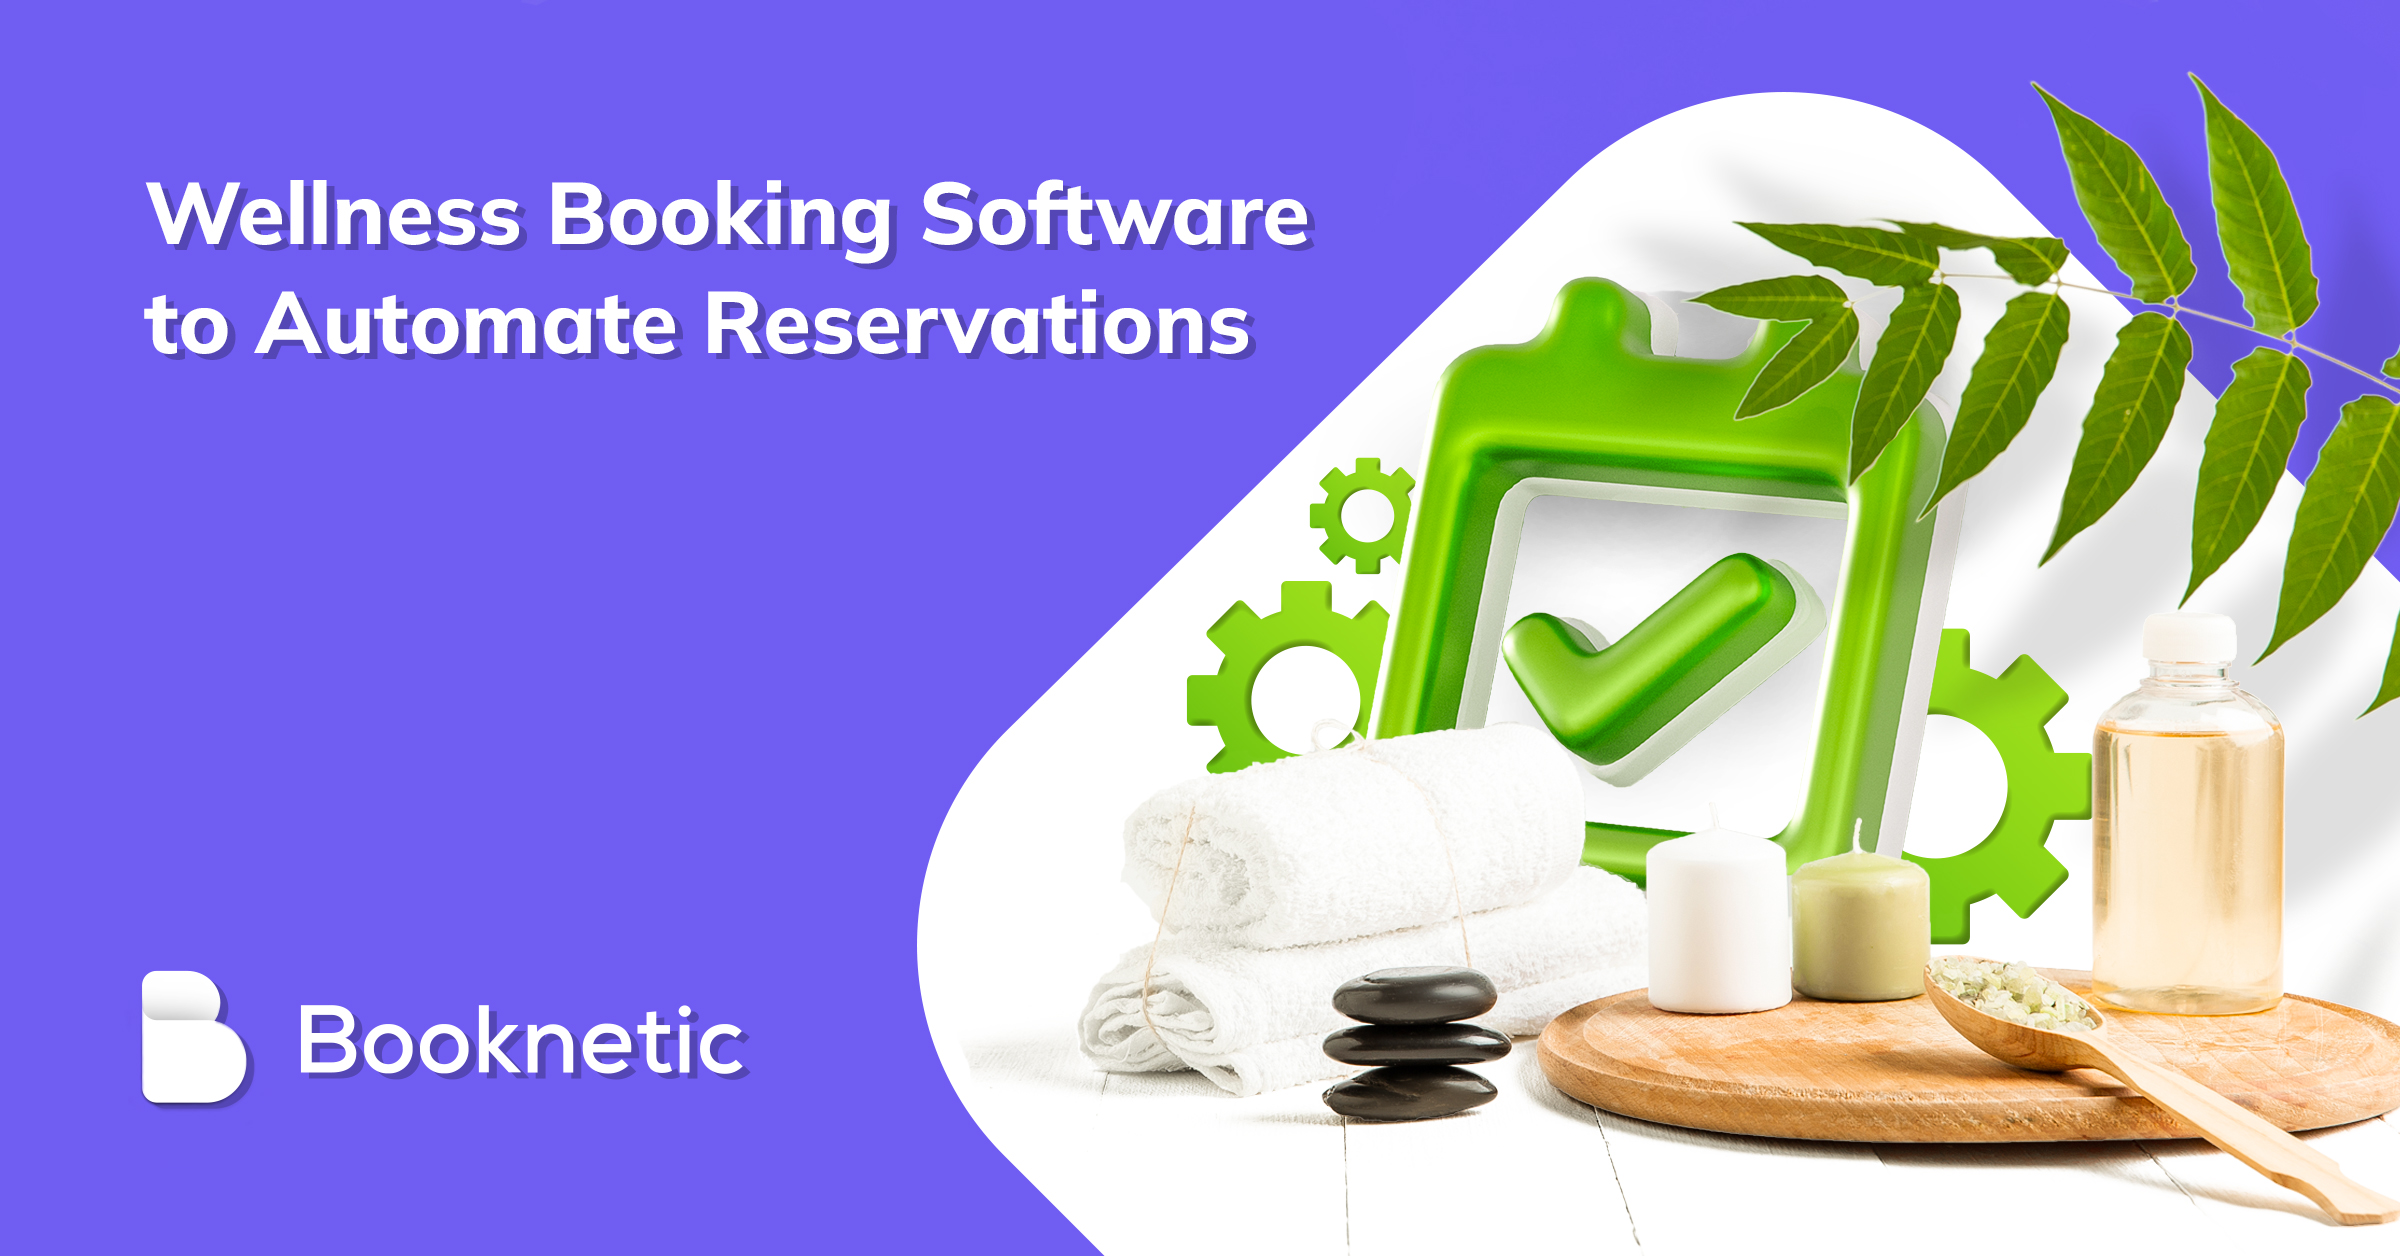 Top 11 Wellness Booking Software to Automate Reservations